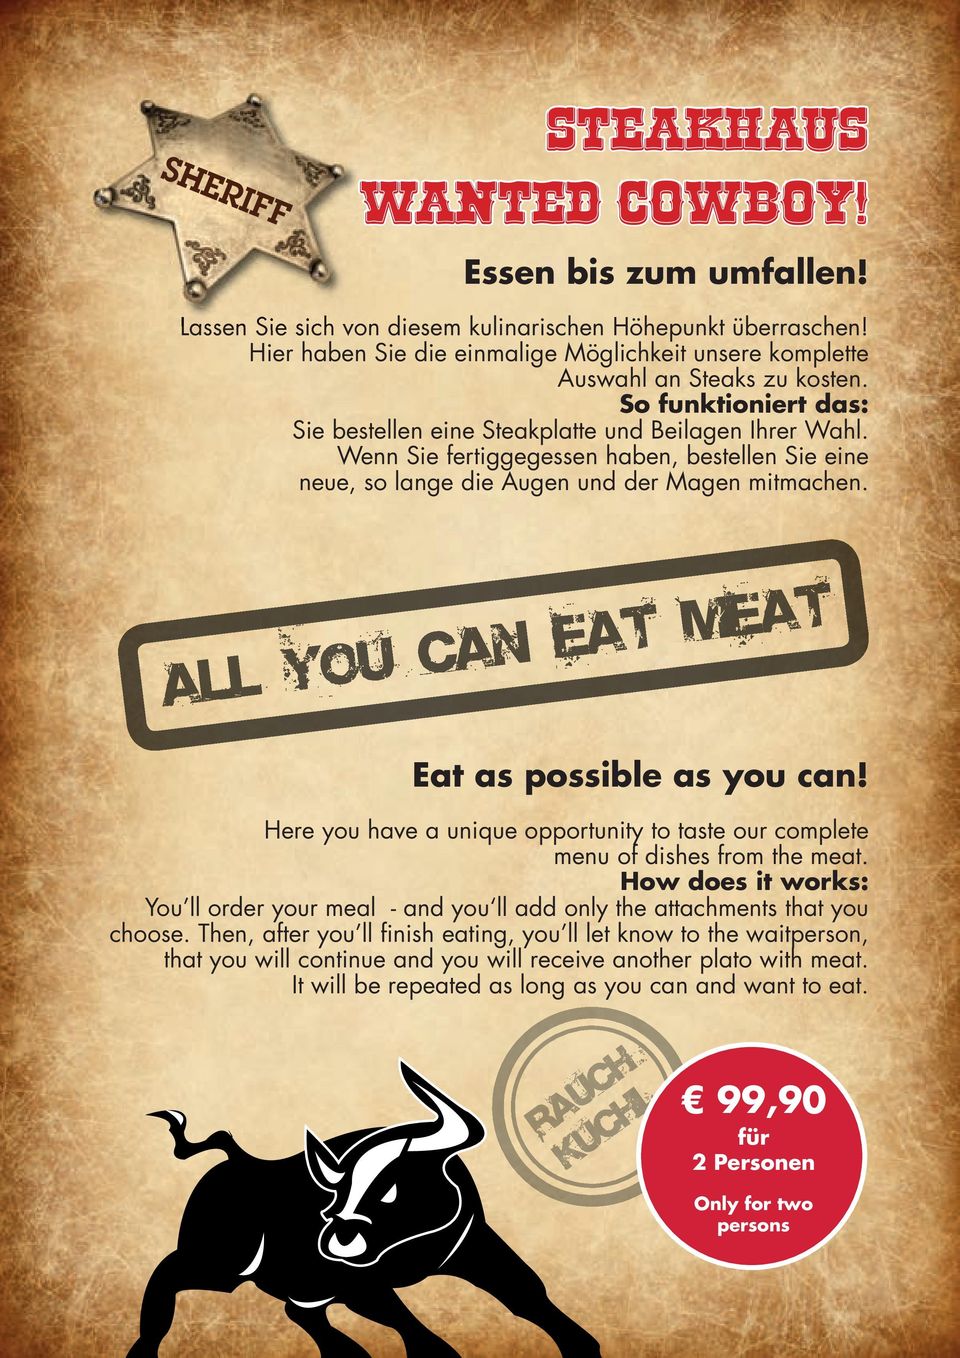 Eat as possible as you can! Here you have a unique opportunity to taste our complete menu of dishes from the meat.